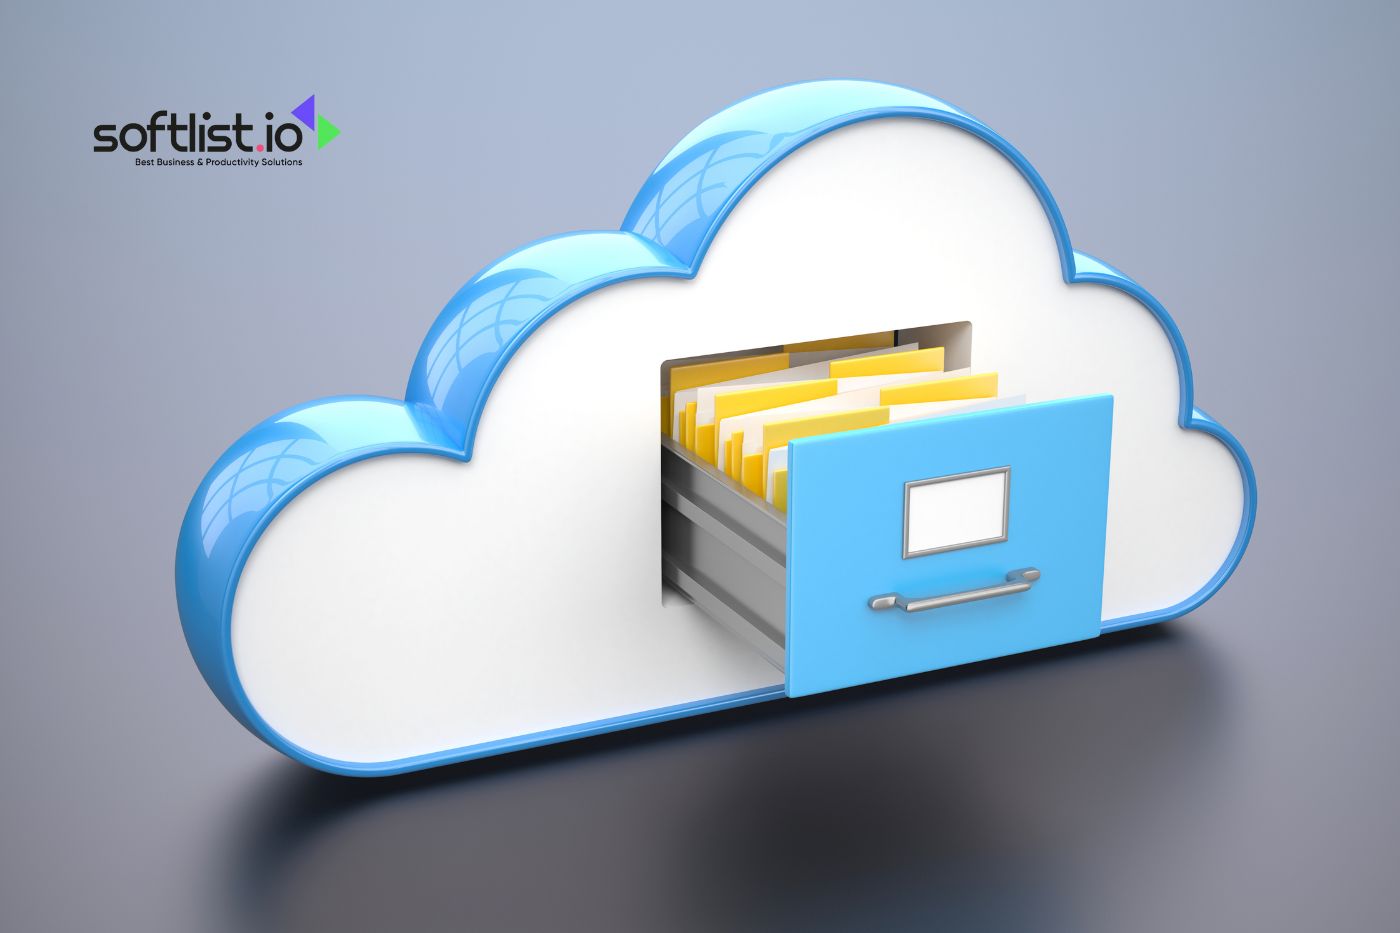 3D illustration of a cloud symbol with a file drawer and documents, representing cloud storage services.